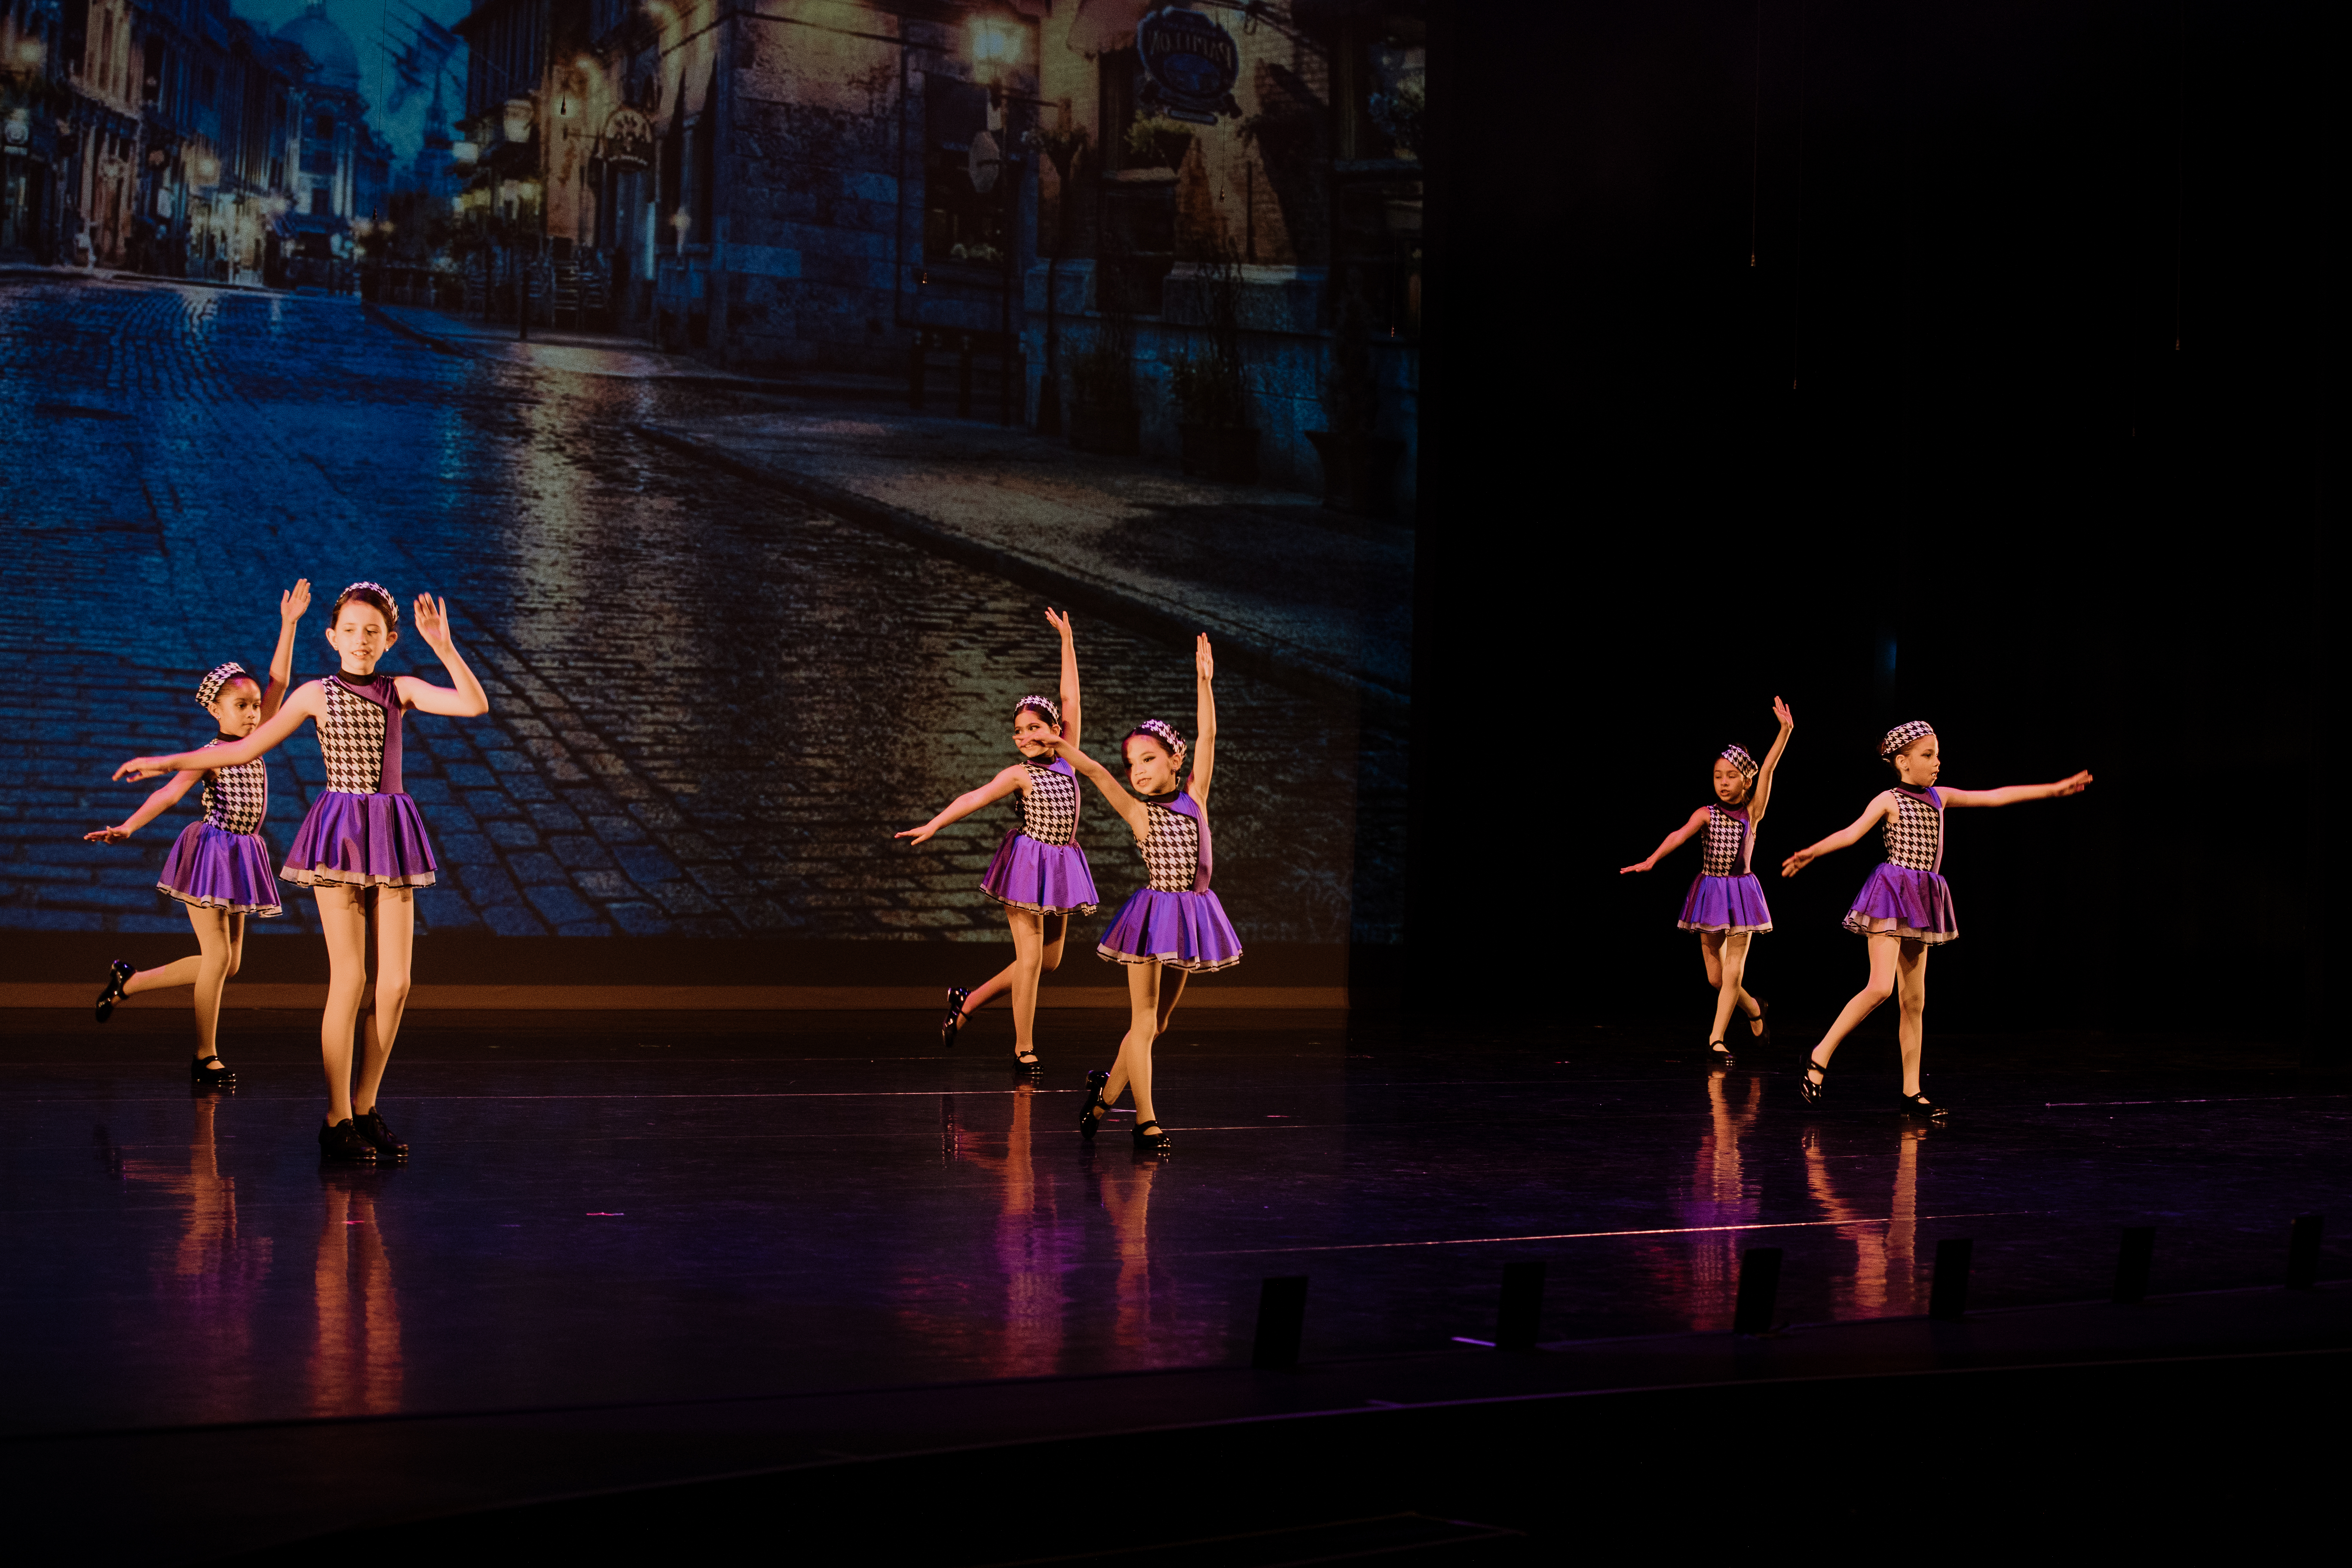 Six dancers performing a tap routine in purple and black and white checkered outfits